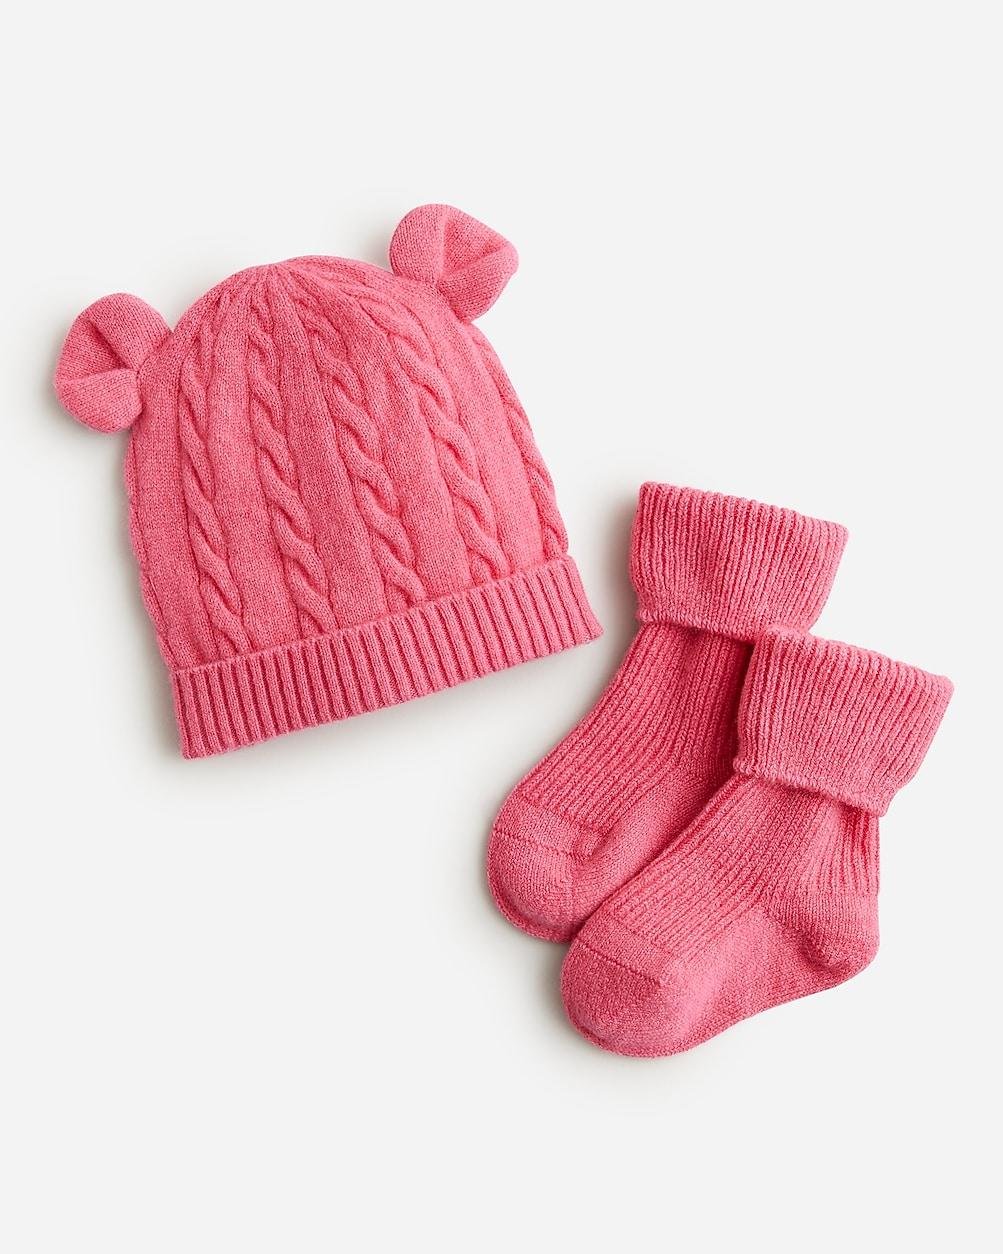 Limited-edition baby cashmere beanie and booties set by J.CREW